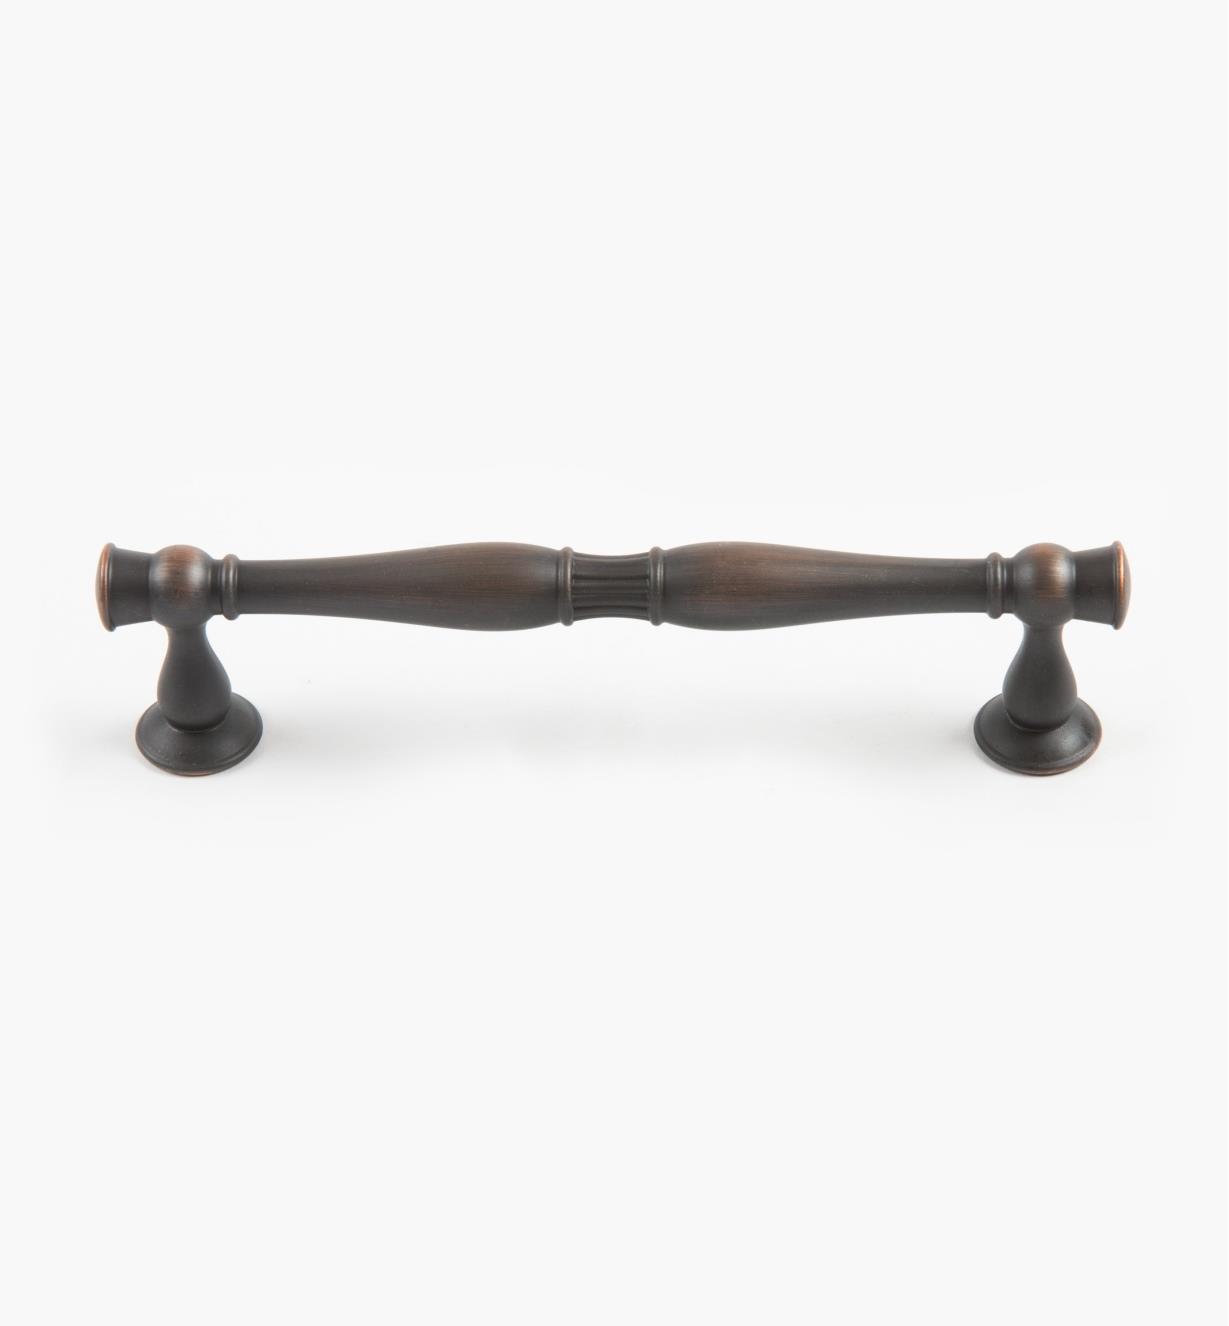 02A1578 - Crawford Oil-Rubbed Bronze 128mm x 37mm Handle, each